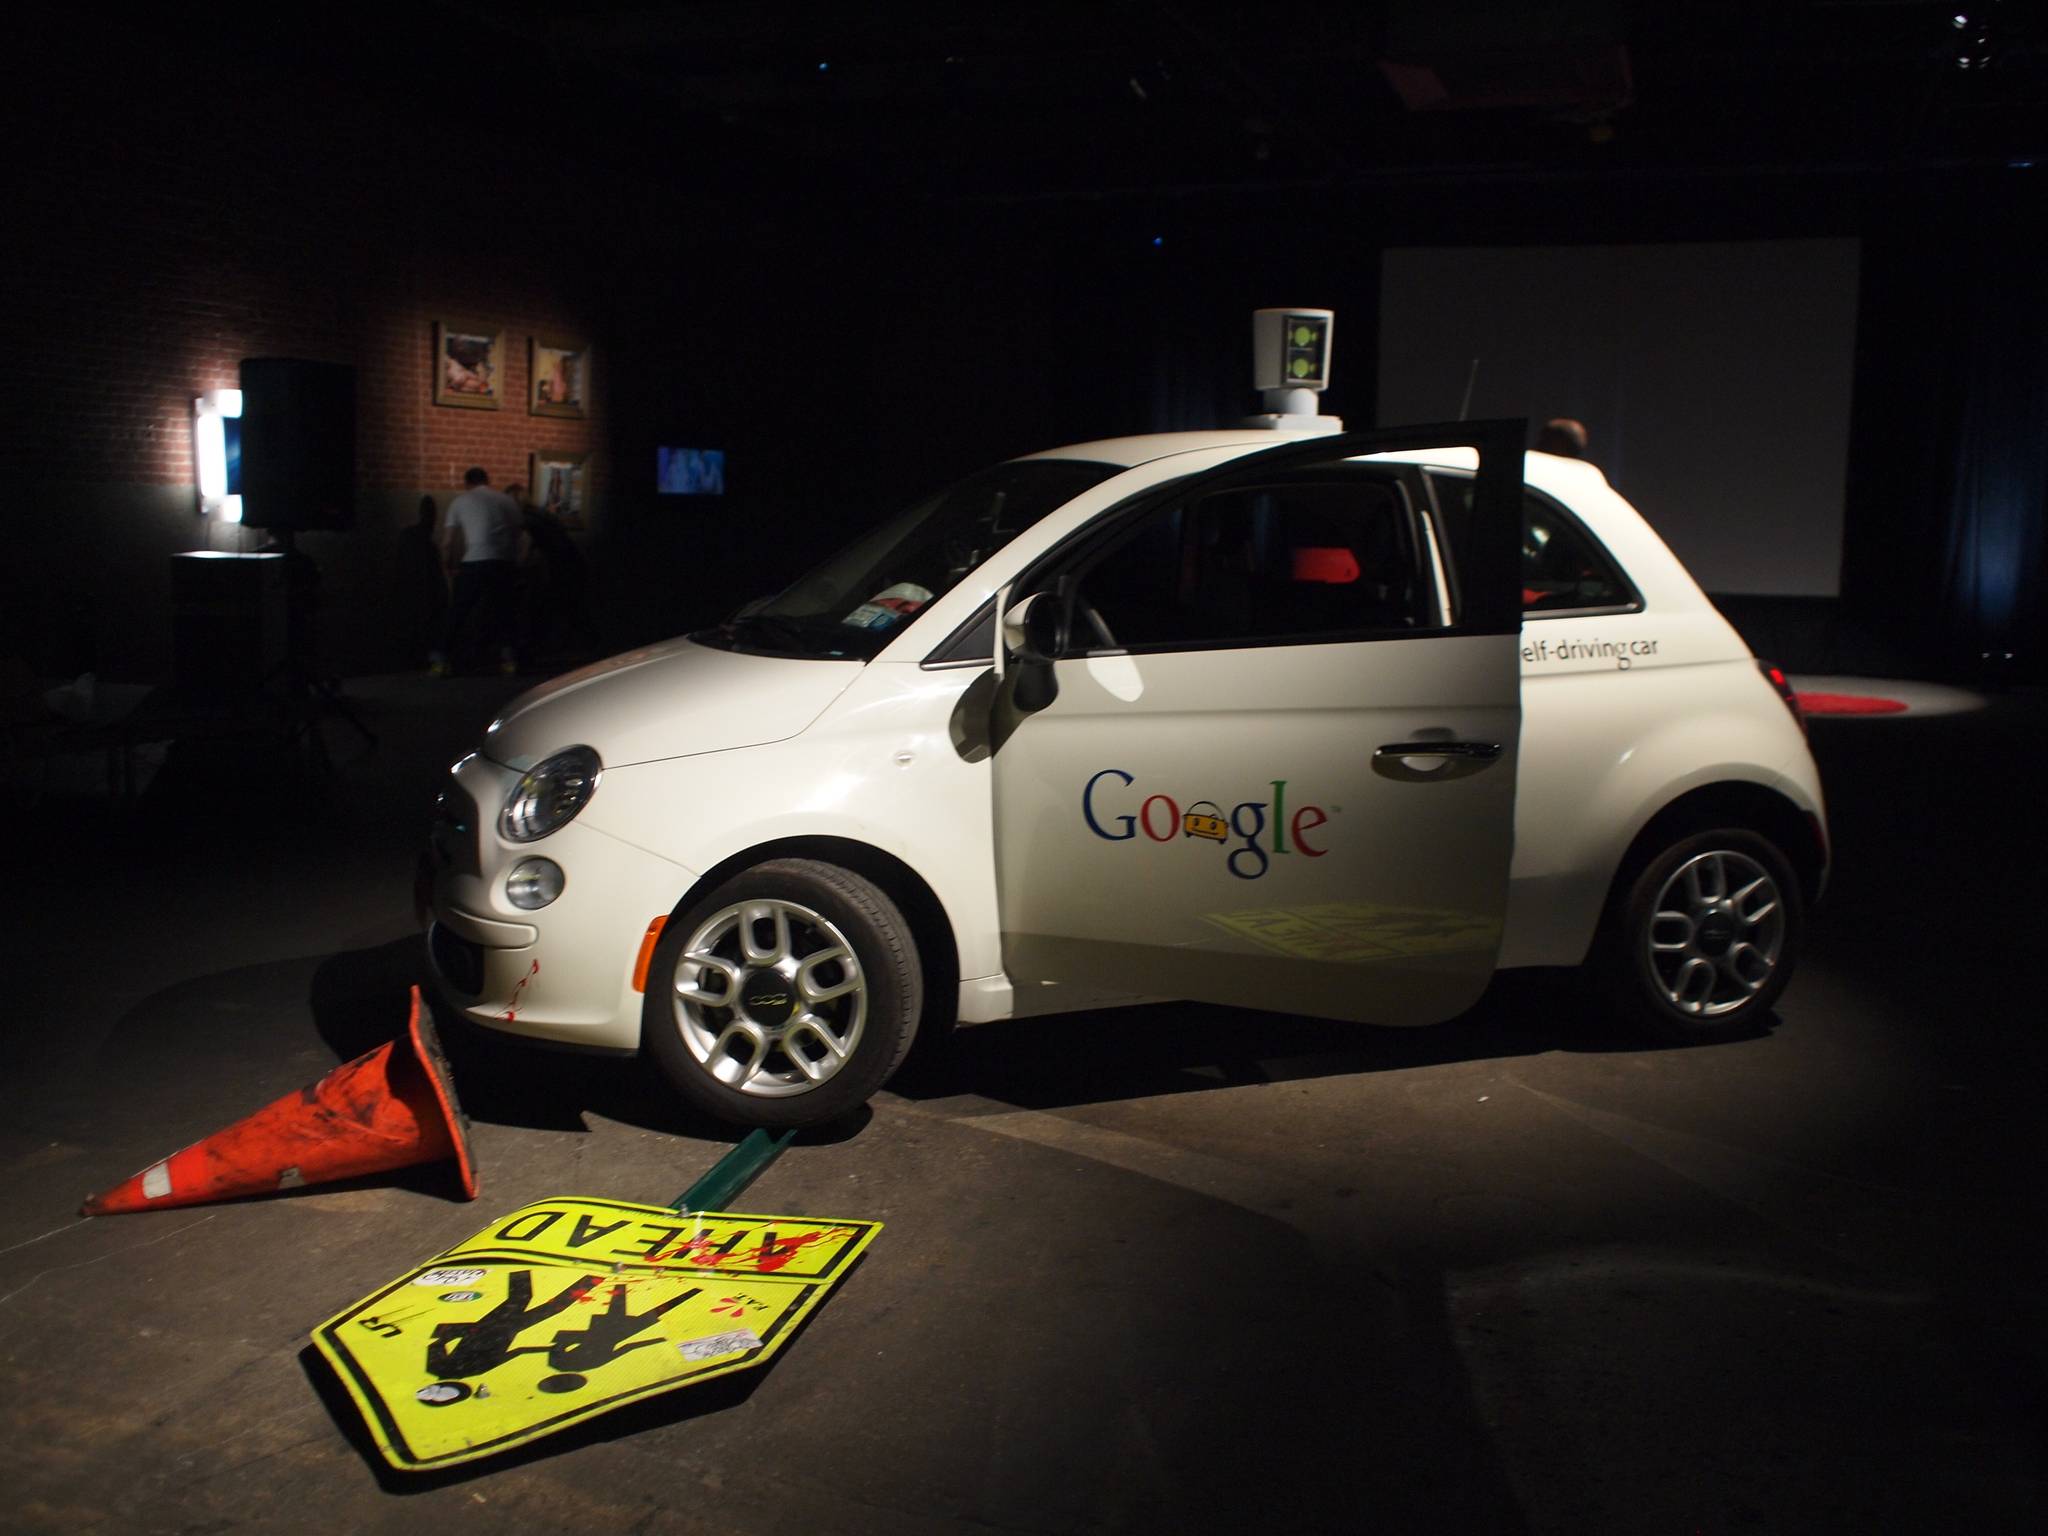 Google is disrupting the insurance industry